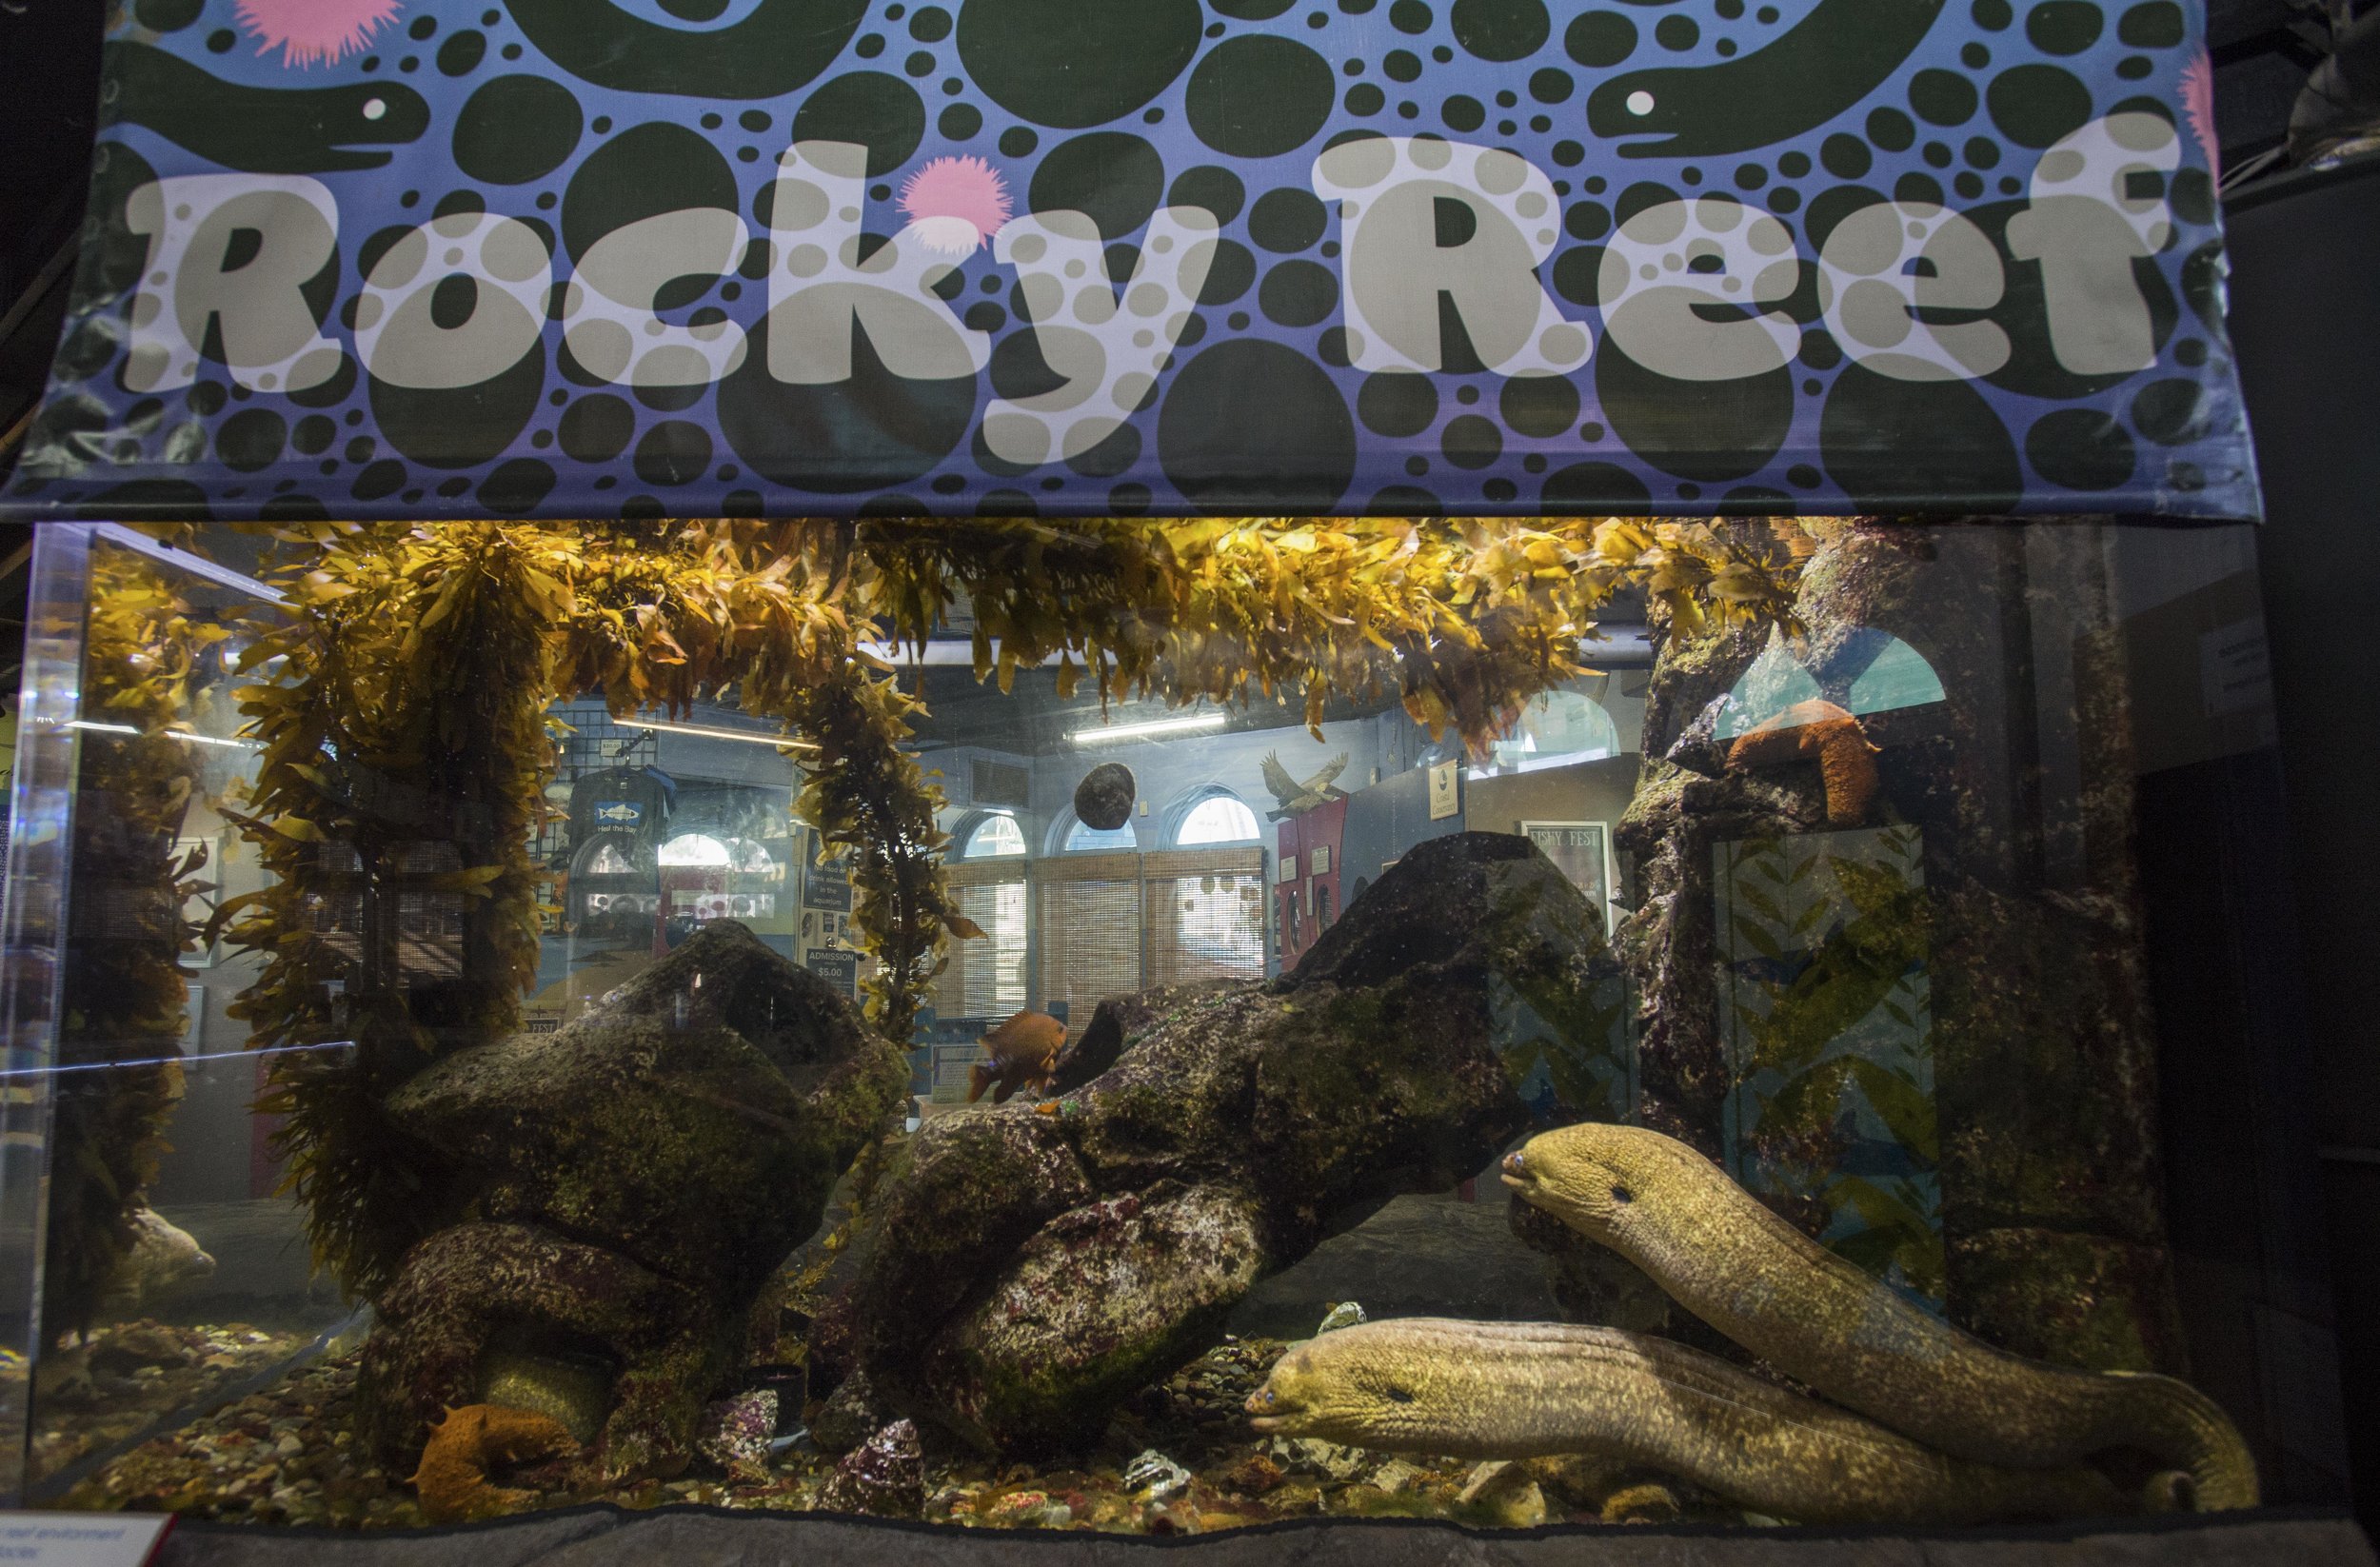  Heal the Bays Santa Monica Pier Aquarium has over 100 local species on exhibit, hands-on activities for children and daily educational programs. The Aquarium is preparing for the upcoming Fishy Fest event on October 28-29. (Josue Martinez) 